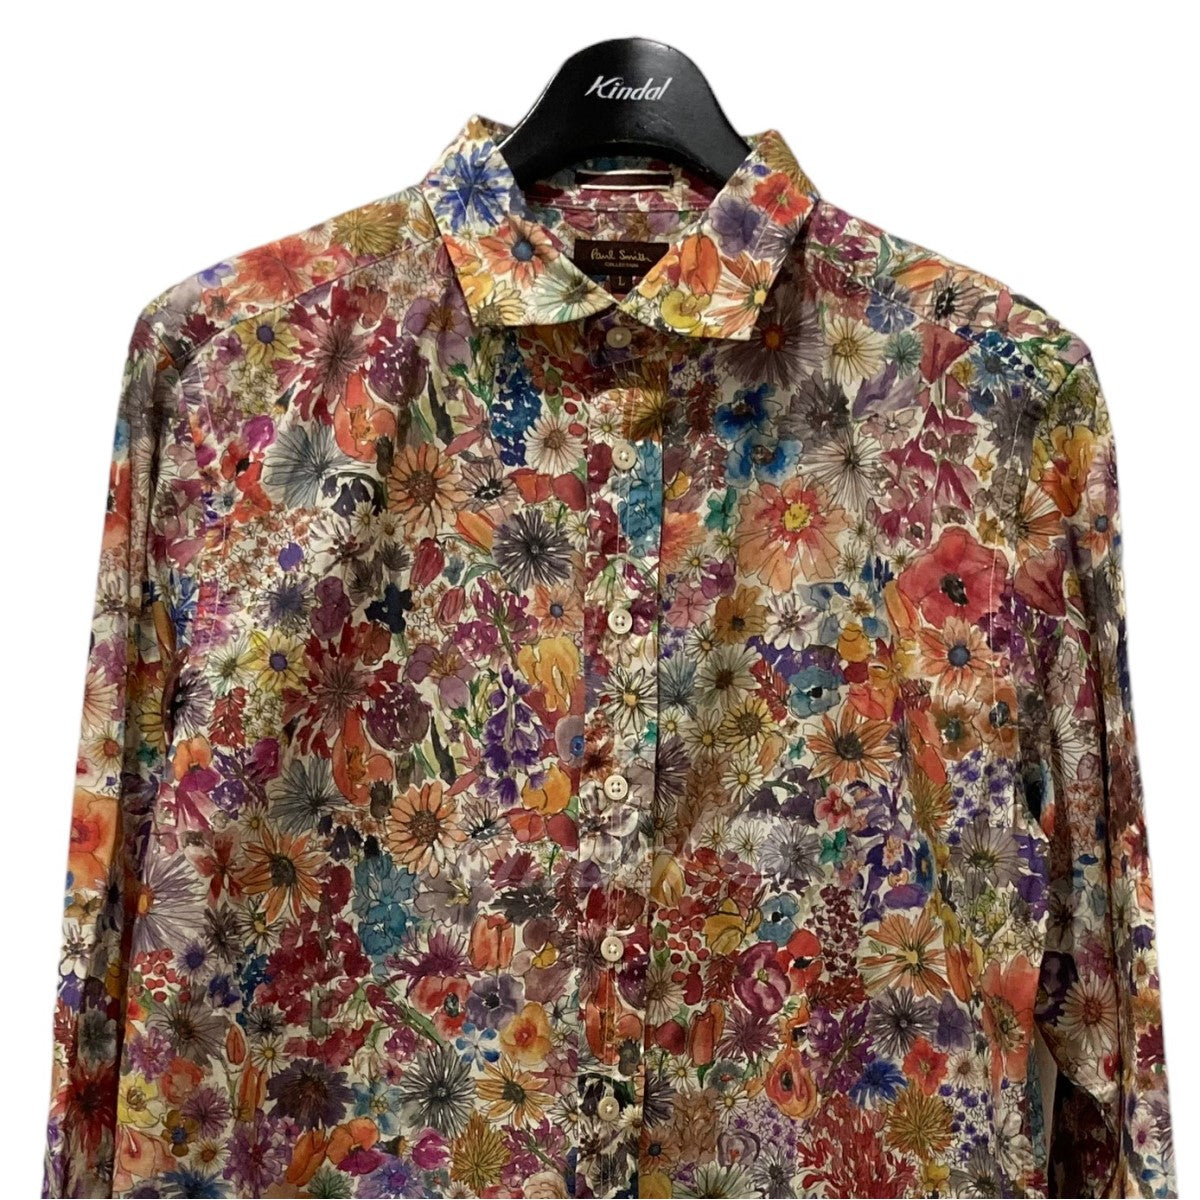 Paul Smith COLLECTION(ポールスミスコレクション) THE WOLD FLOWER PRINT SHIRT 花柄シャツ 254388